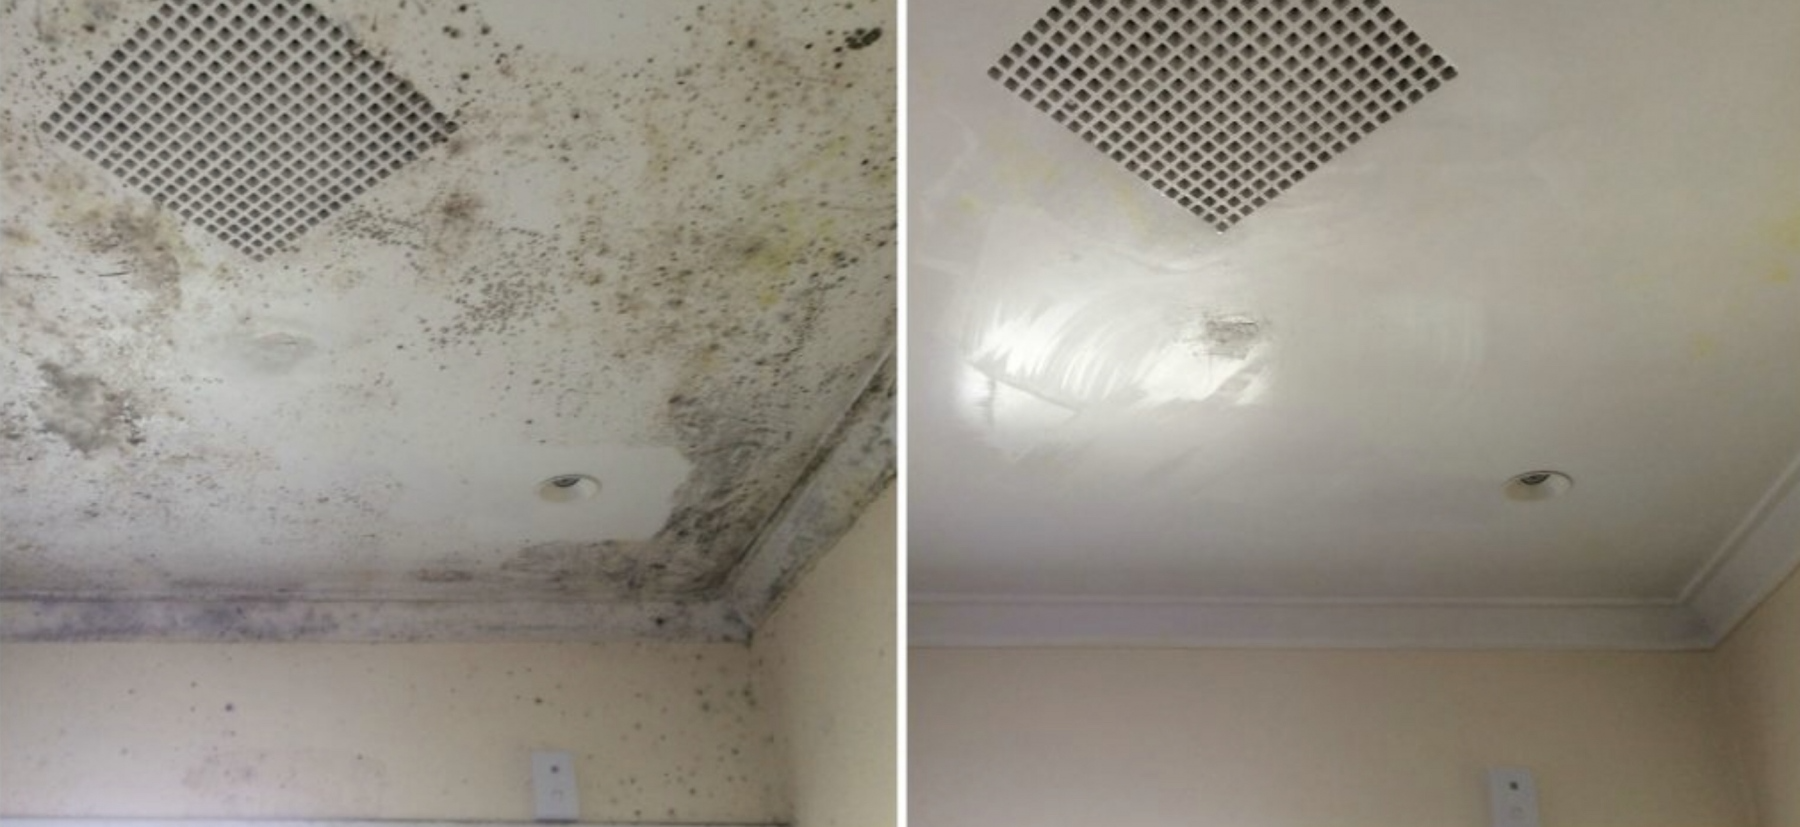 Mould removal/ mould control process - Melbourne Cleaners